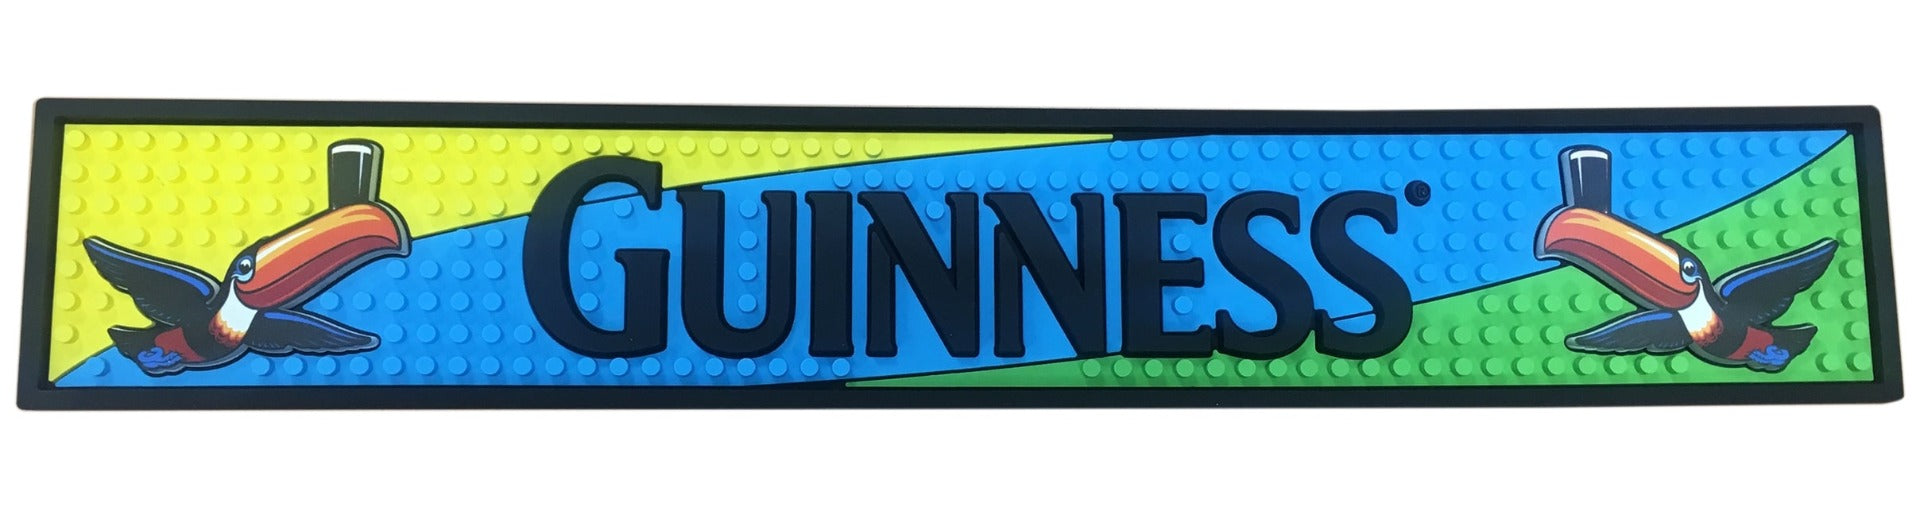 The Guinness Toucan PVC Bar Mat is displayed on a vibrant bar mat for your home bar.